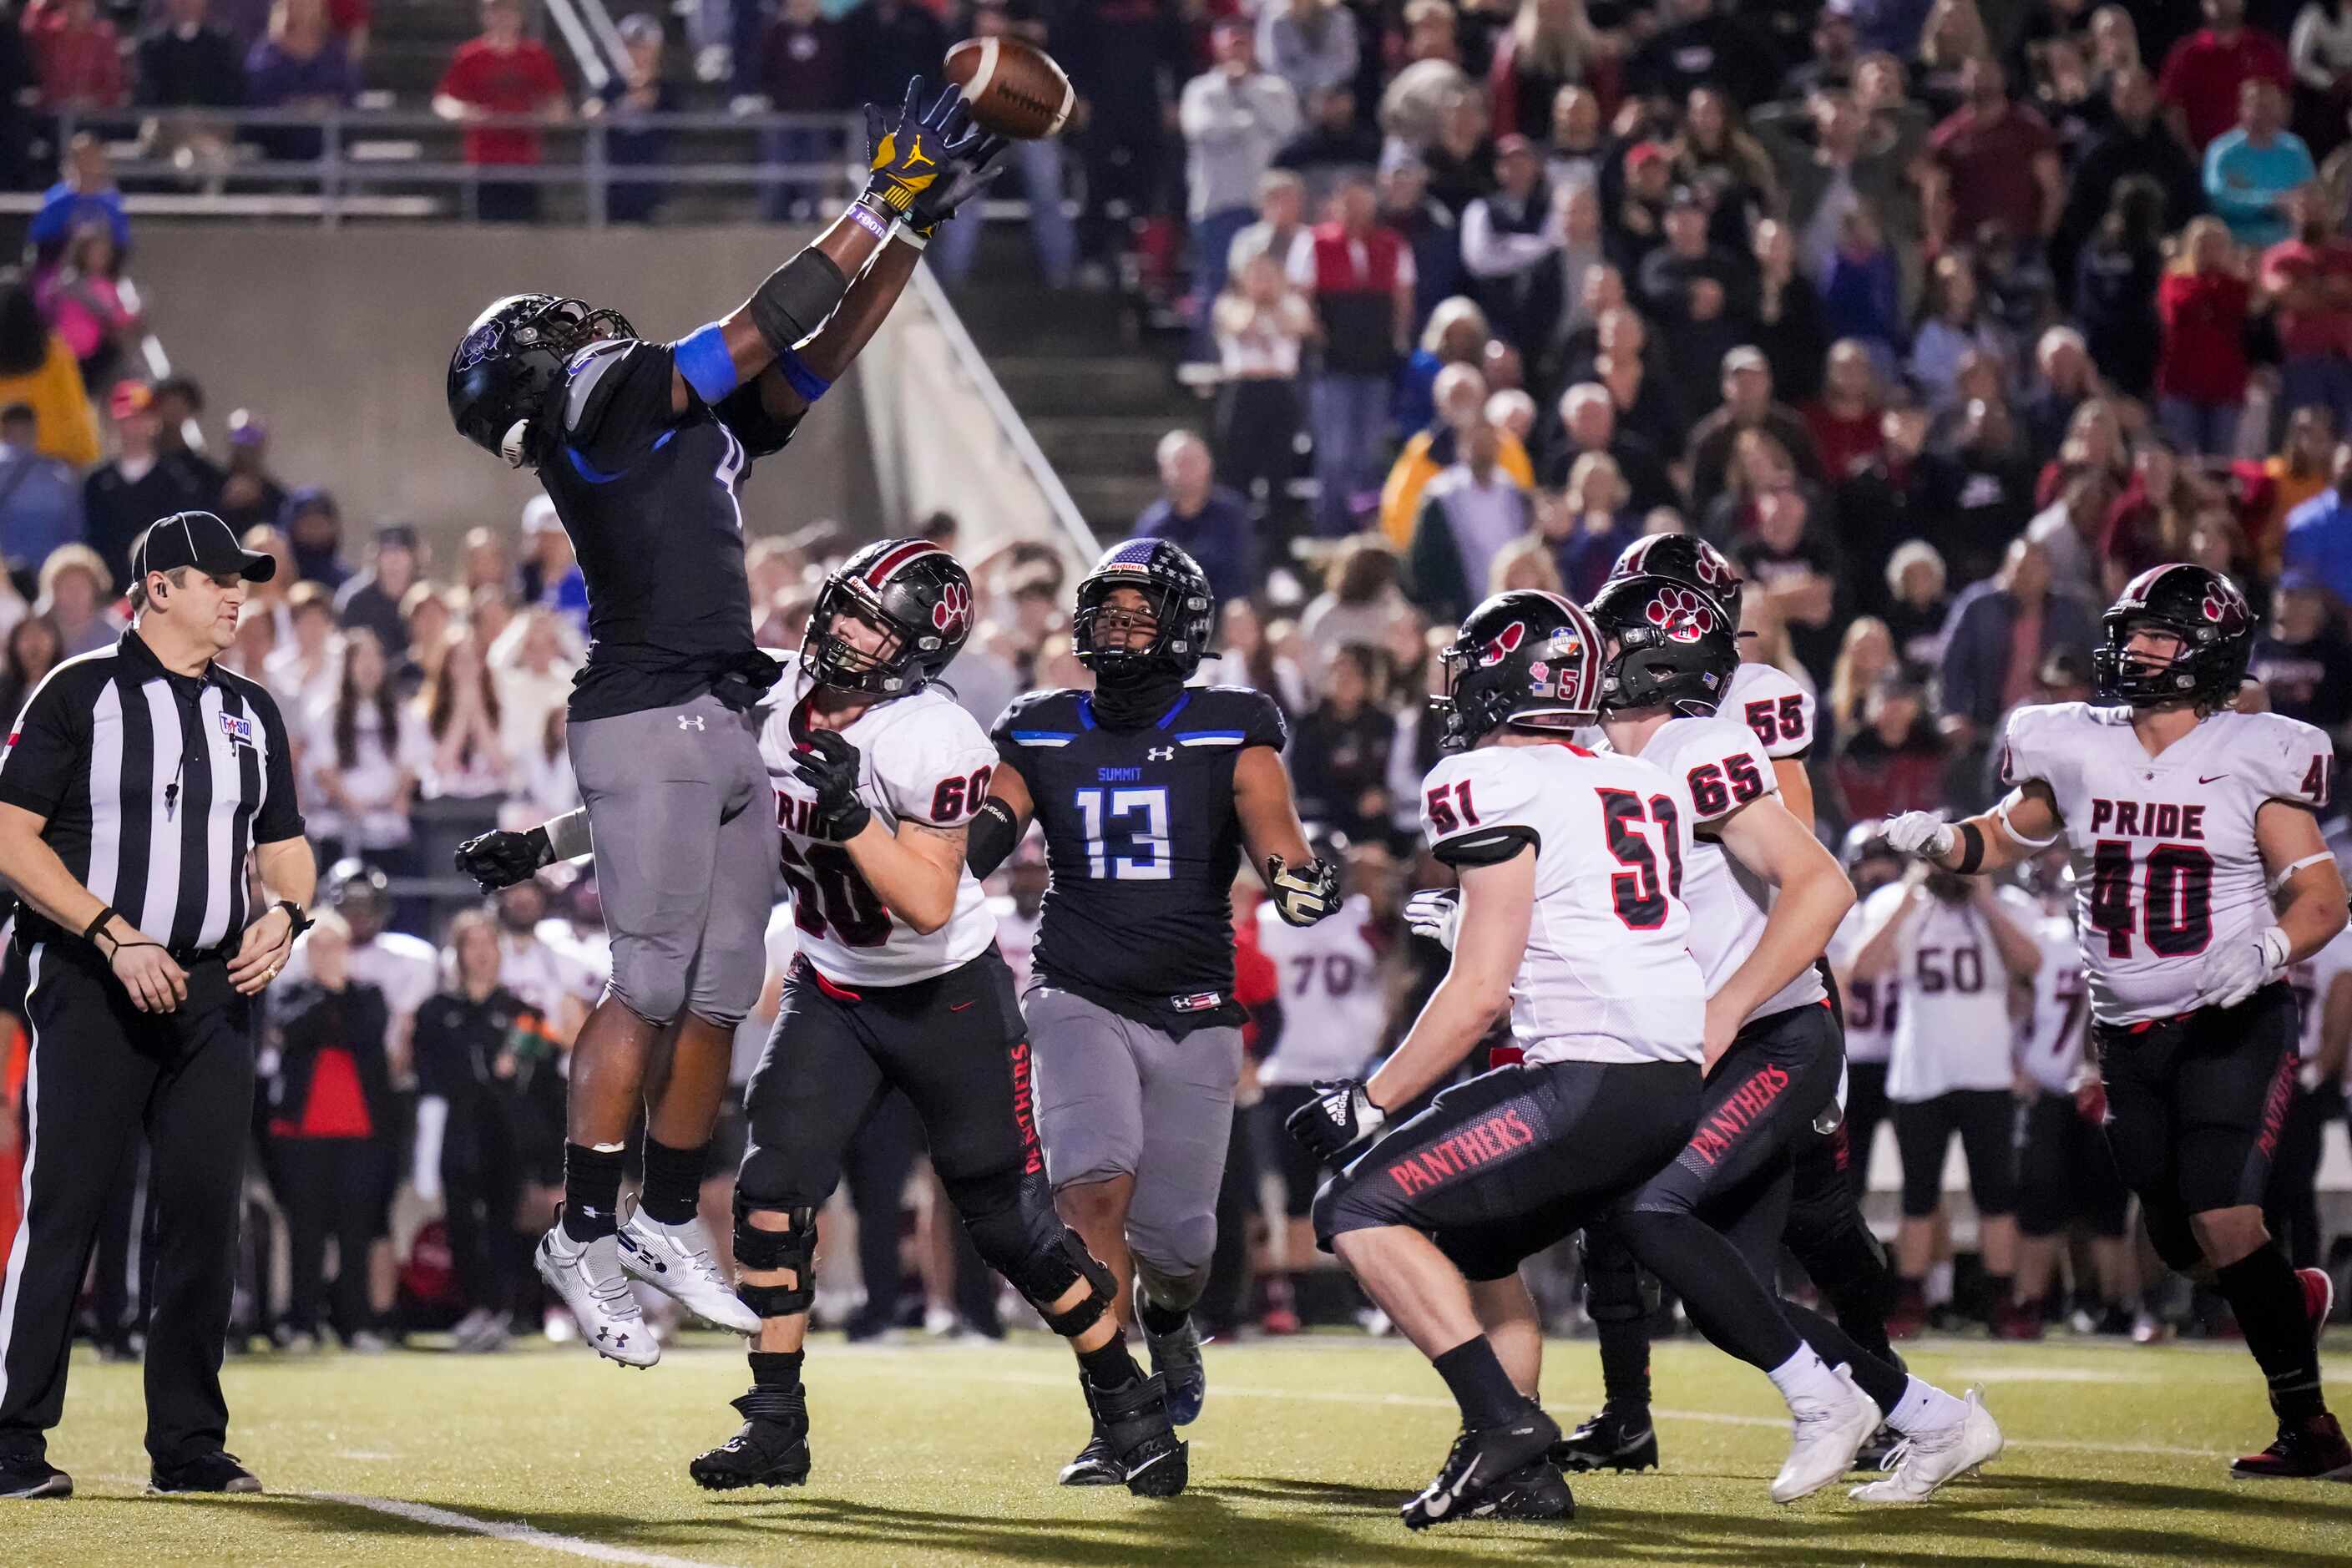 Mansfield Summit defensive lineman Joseph Adedire (4) leaps to catch the ball over...